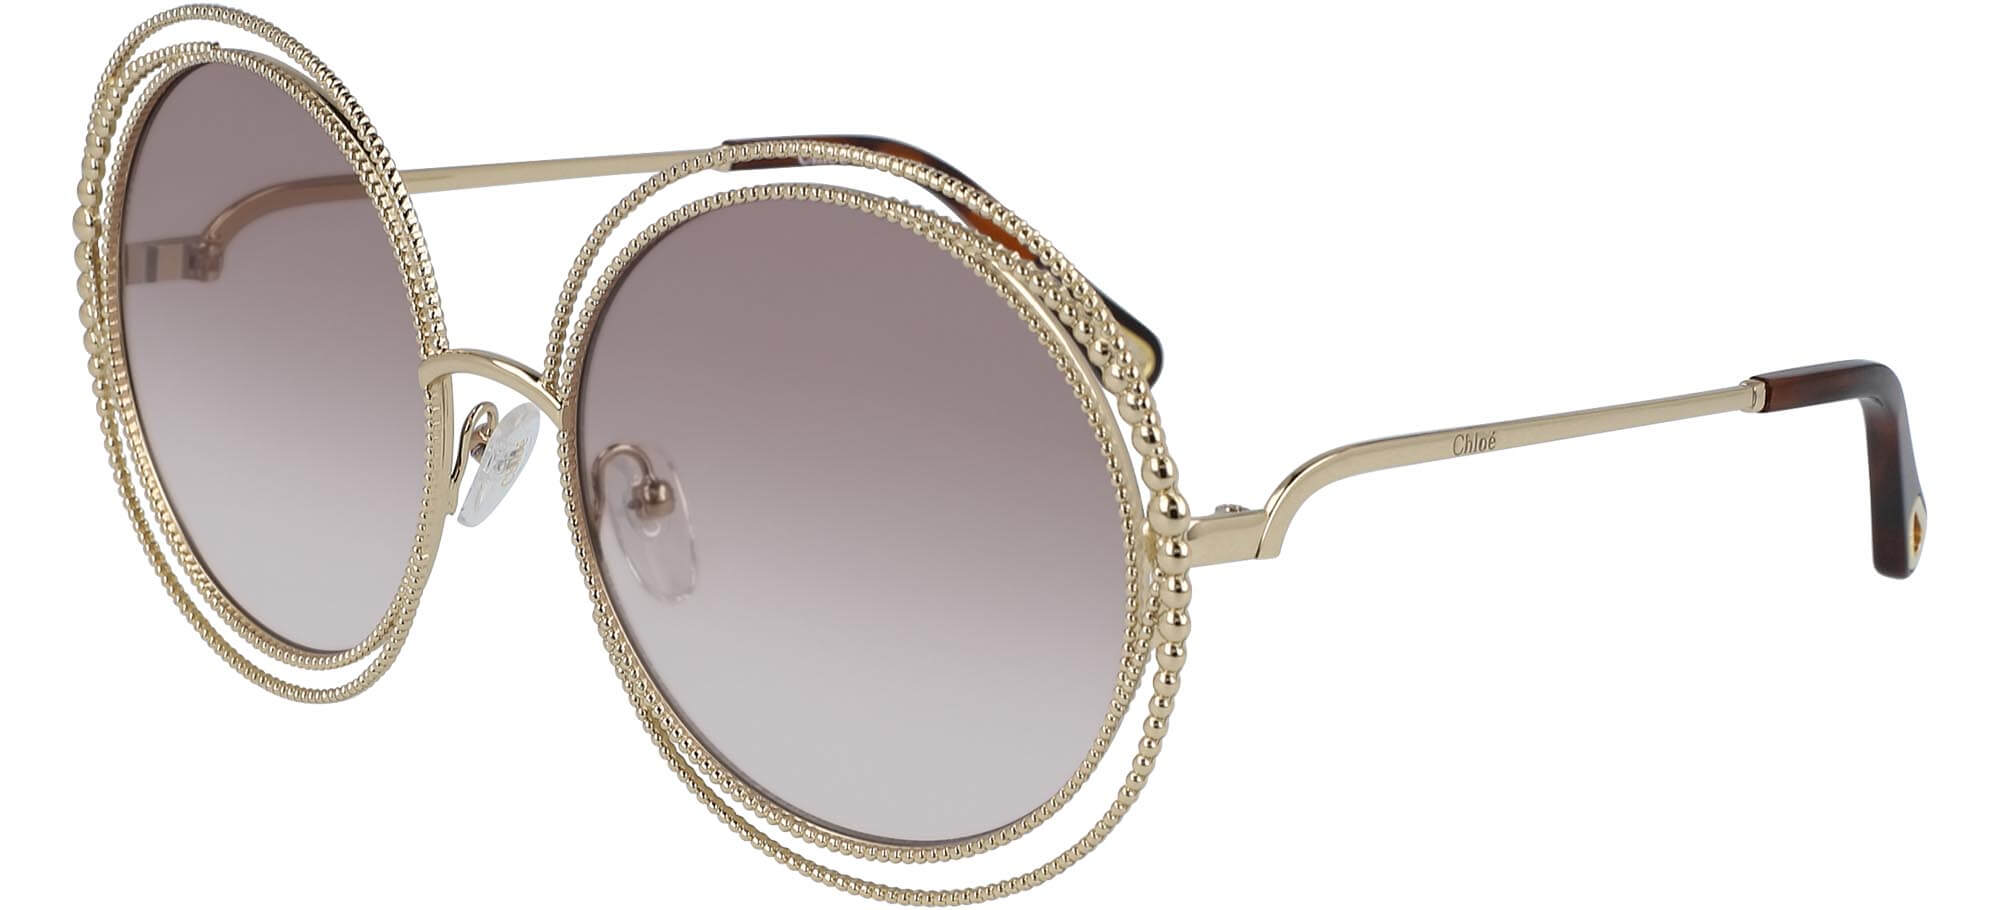 ChloéCARLINA CHAIN CE114SCGold/light Grey Brown Shaded (722 A)